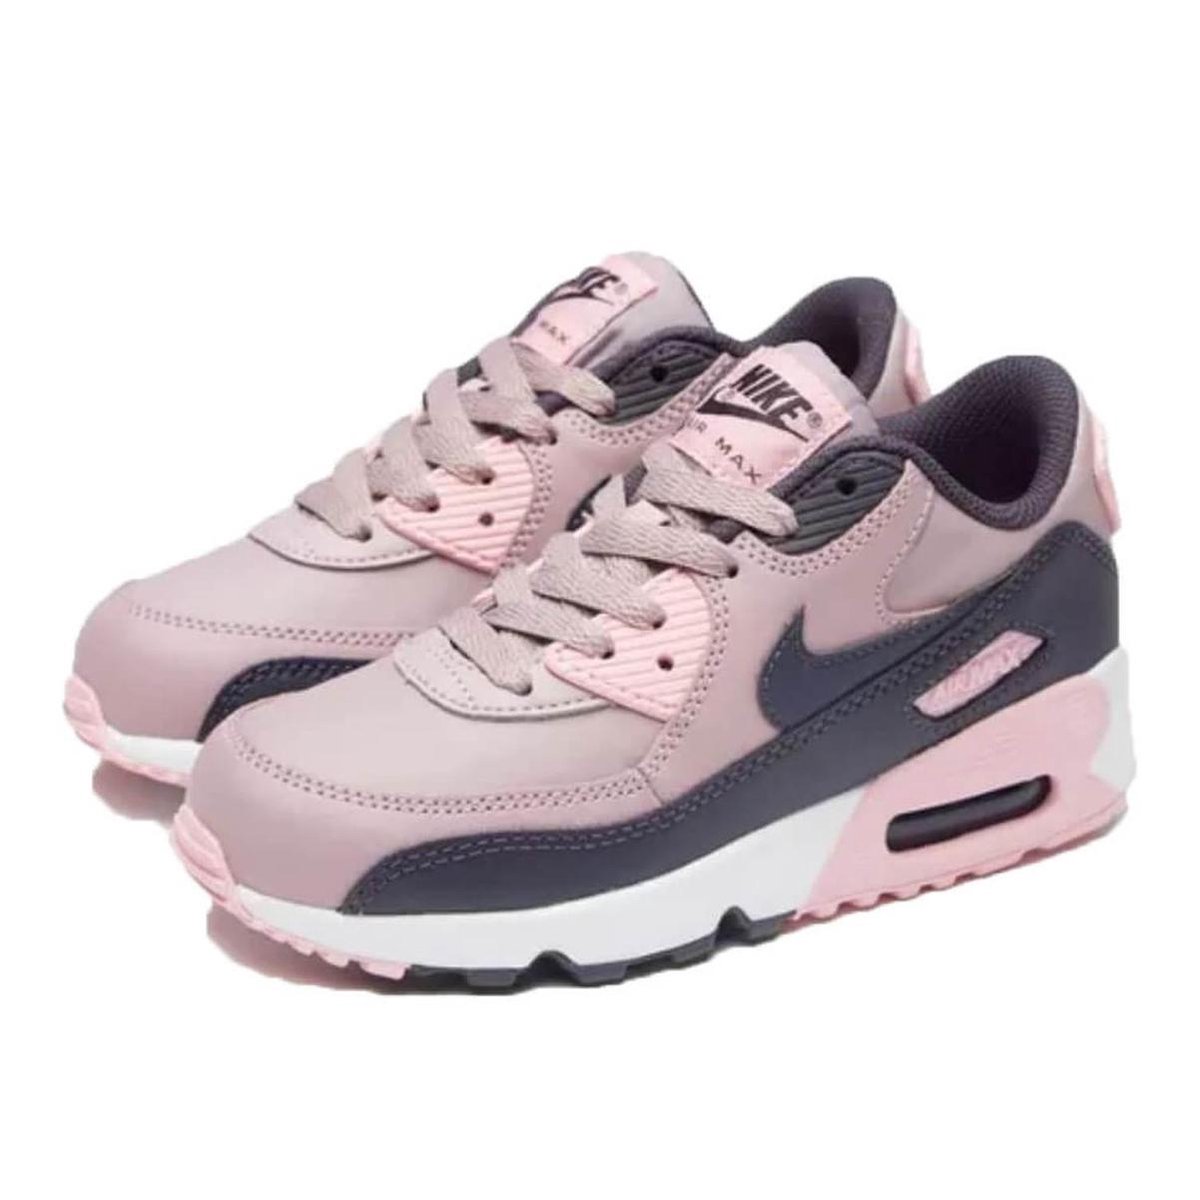 native Uithoudingsvermogen Succes Nike Air Max 90 Leather PS 833377-602 Roze Paars-31 | bol.com